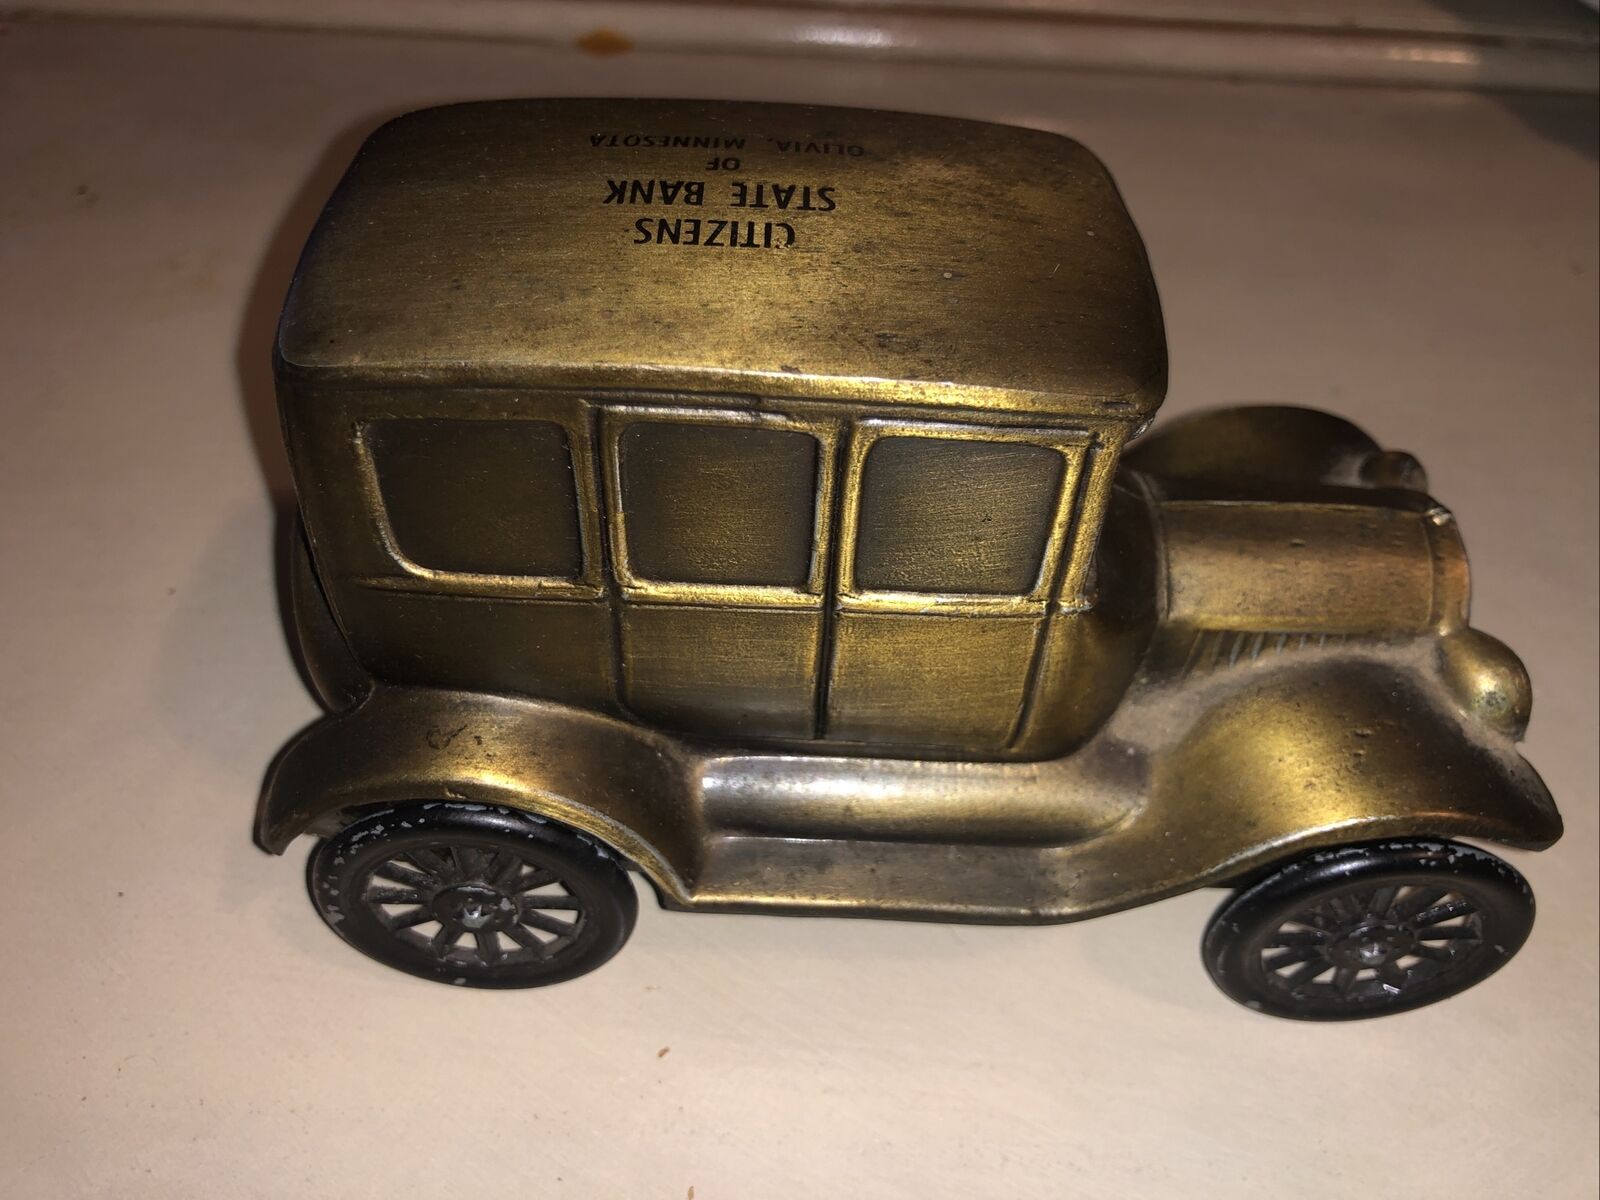 VINTAGE 1926 MODEL T FORD CAR COIN BANK Made By BANTHRICO INC. Chicago, USA